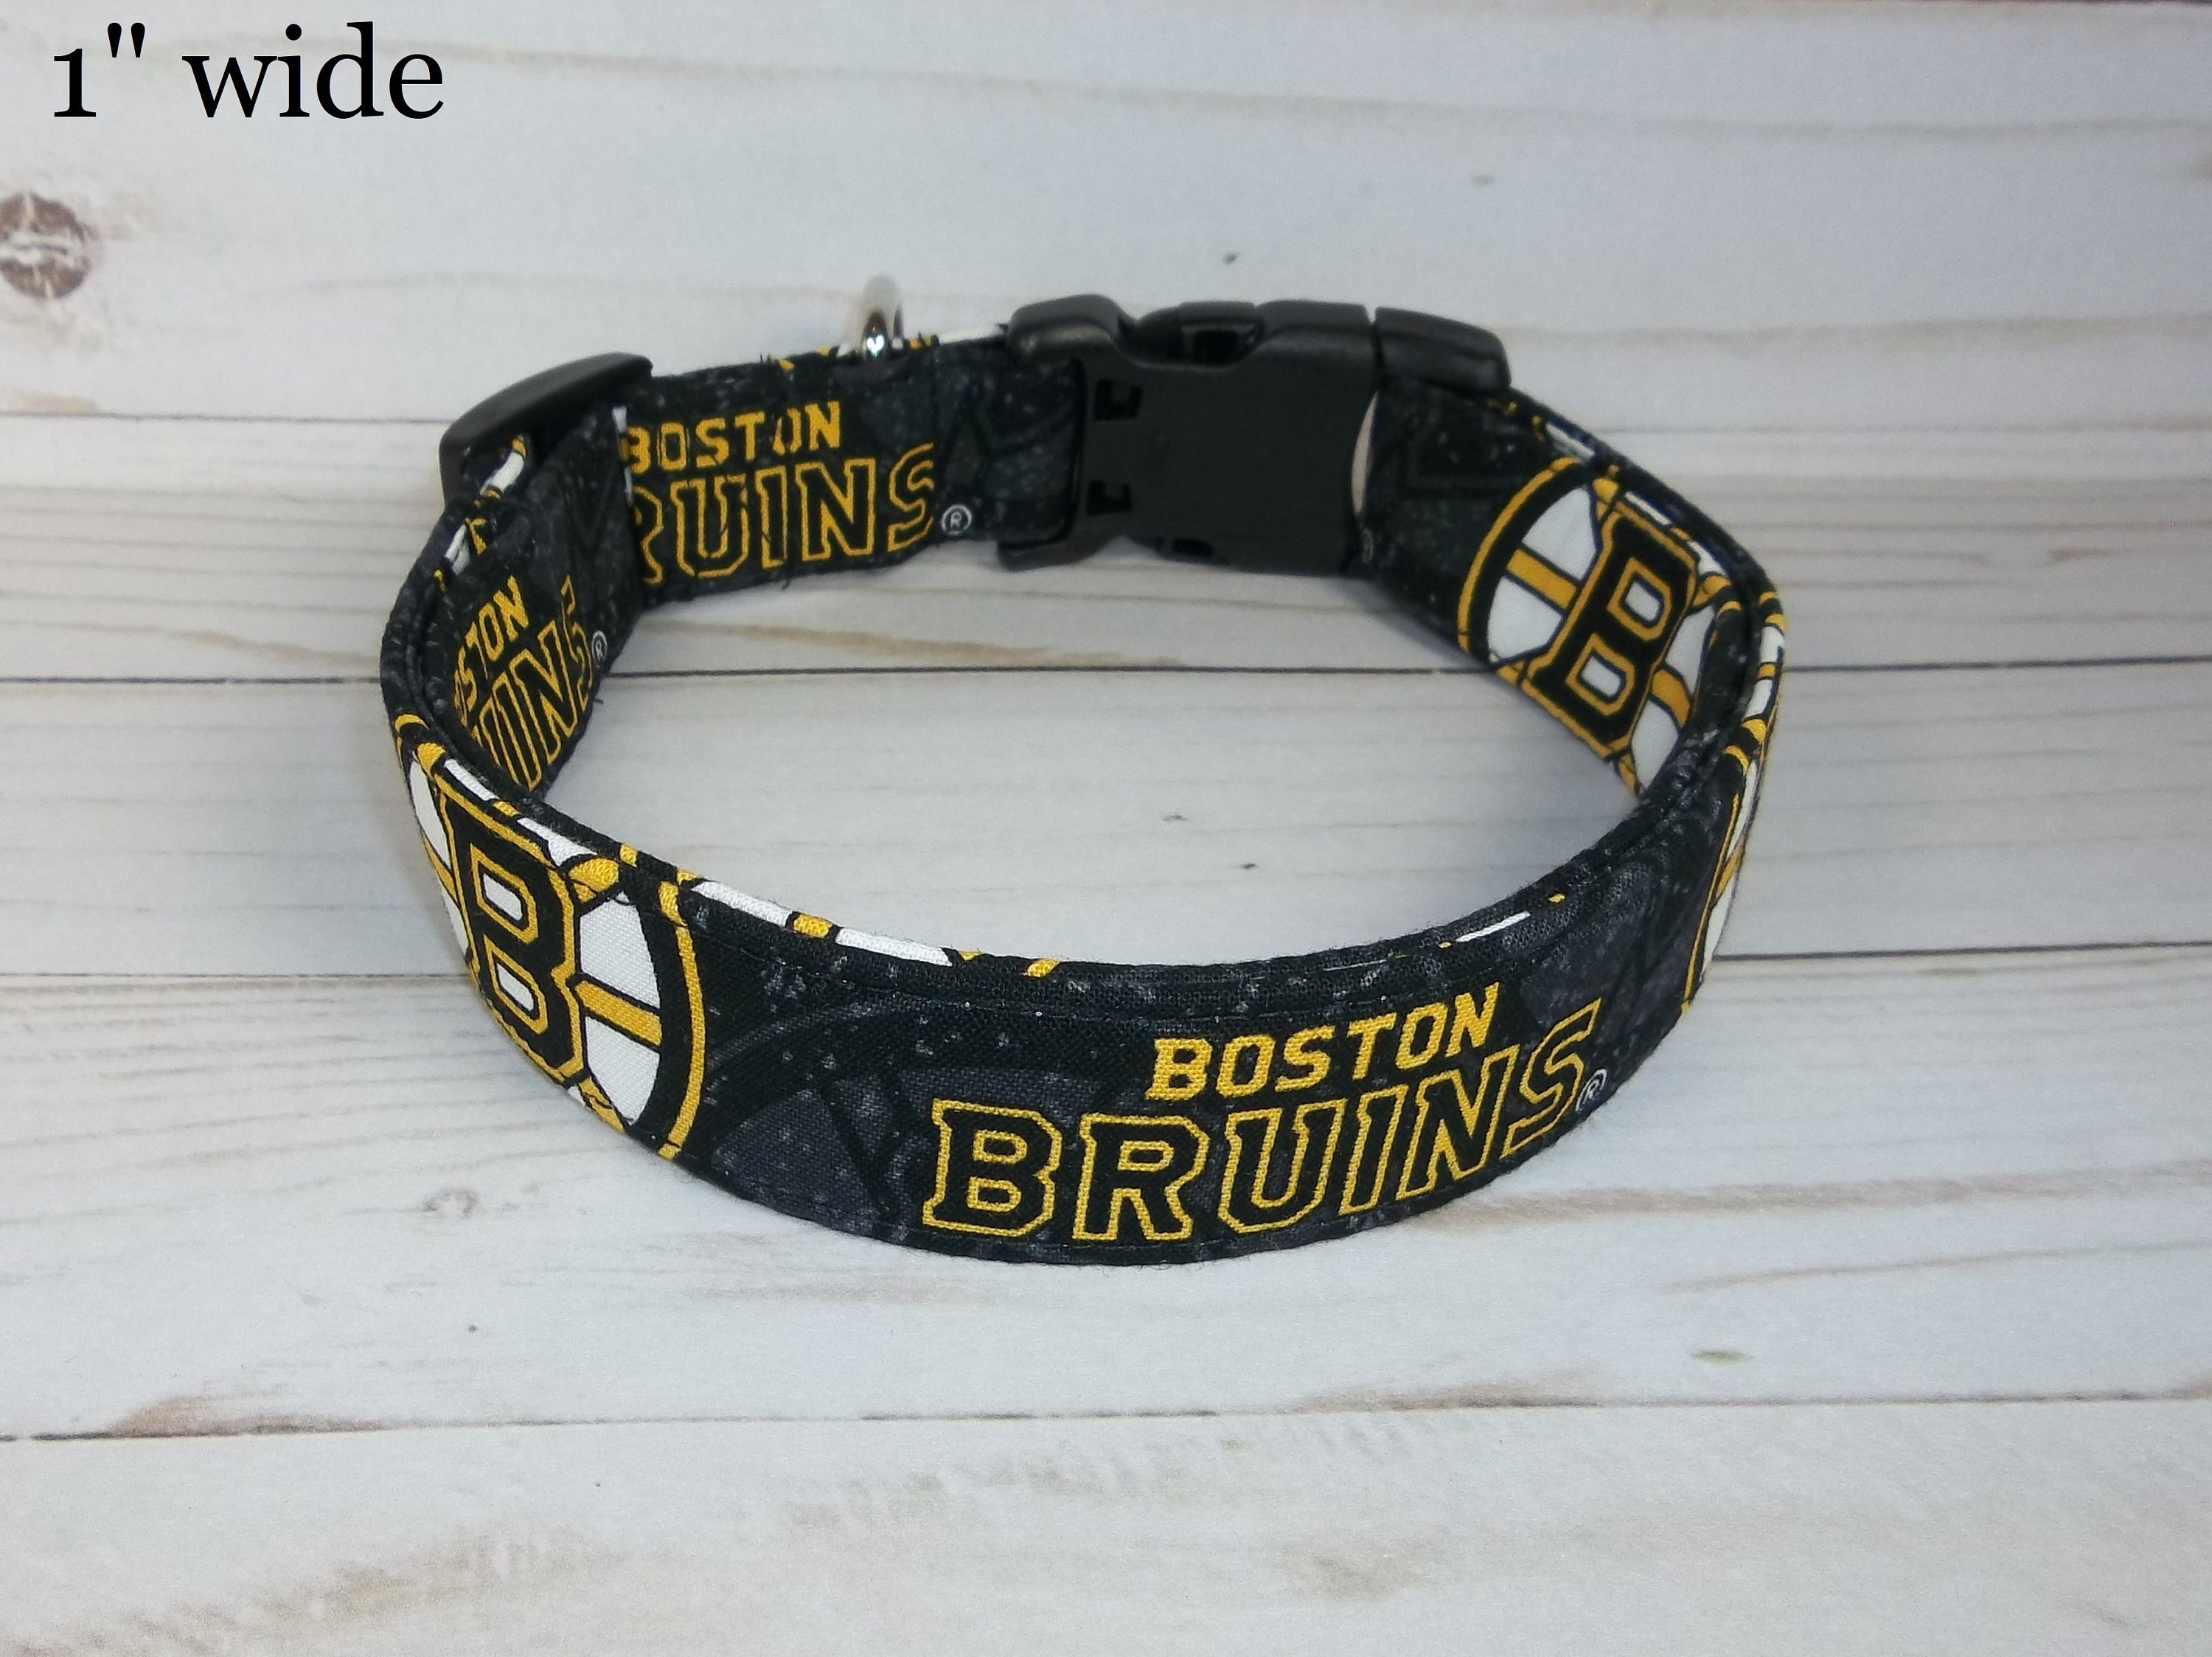 All Star Dogs: Boston Bruins Pet Products